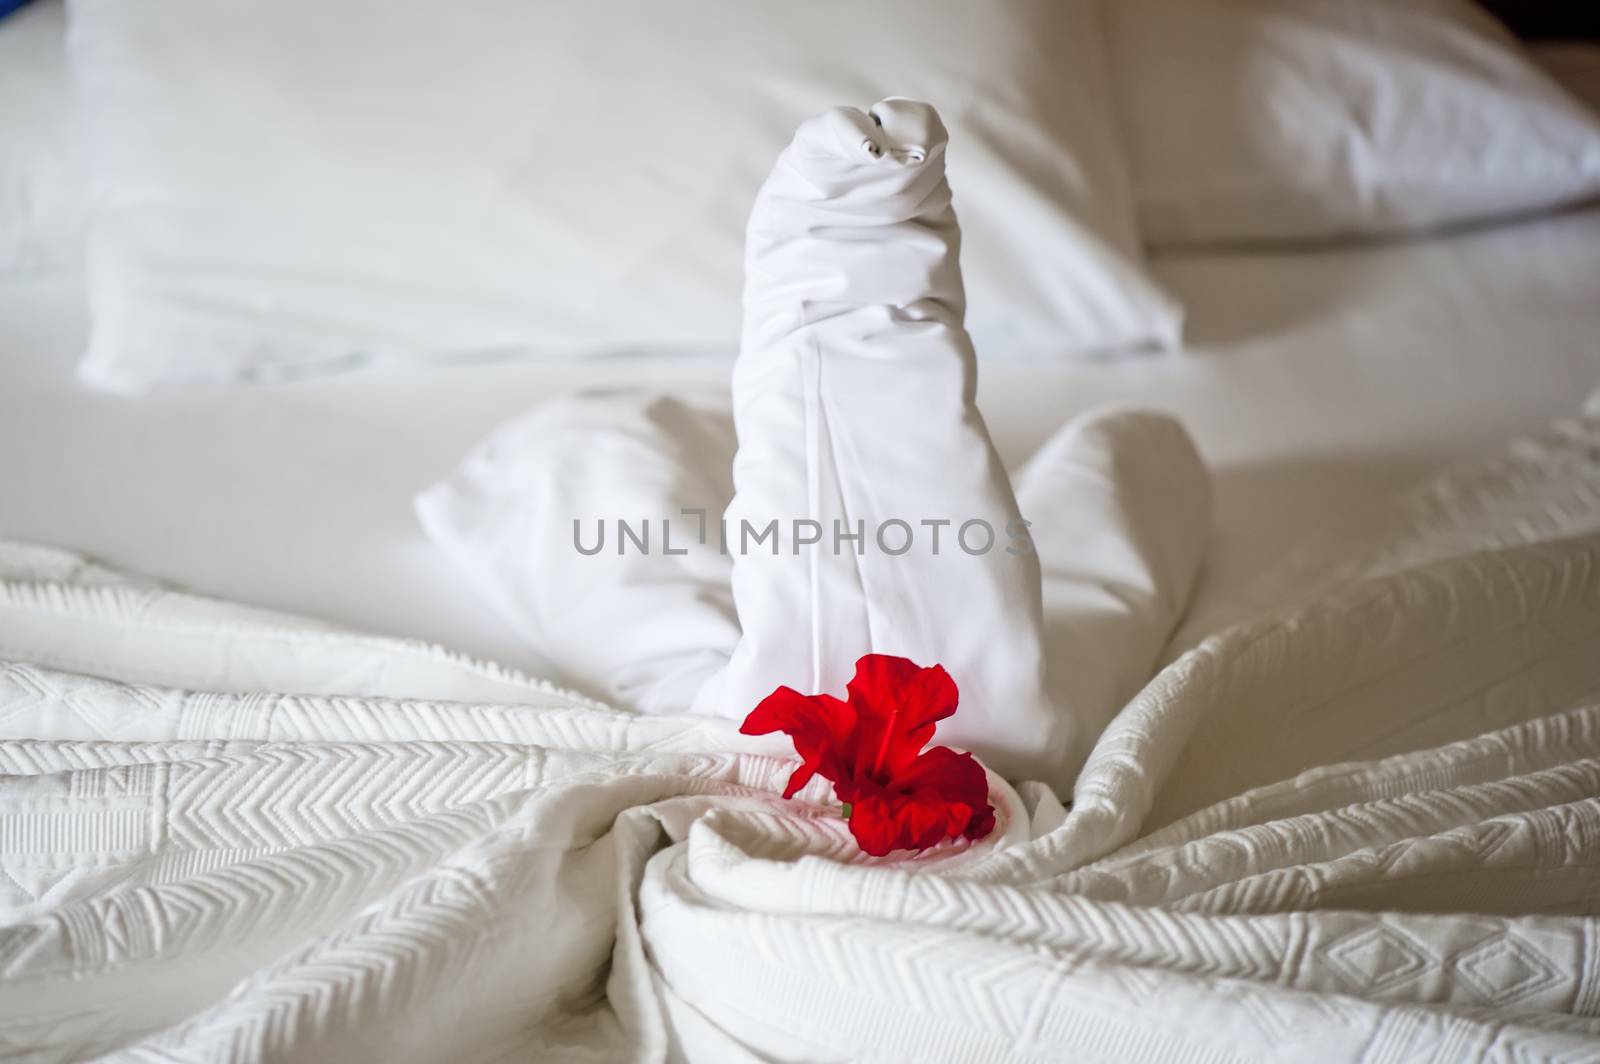 The composition of the swan on the bed linen